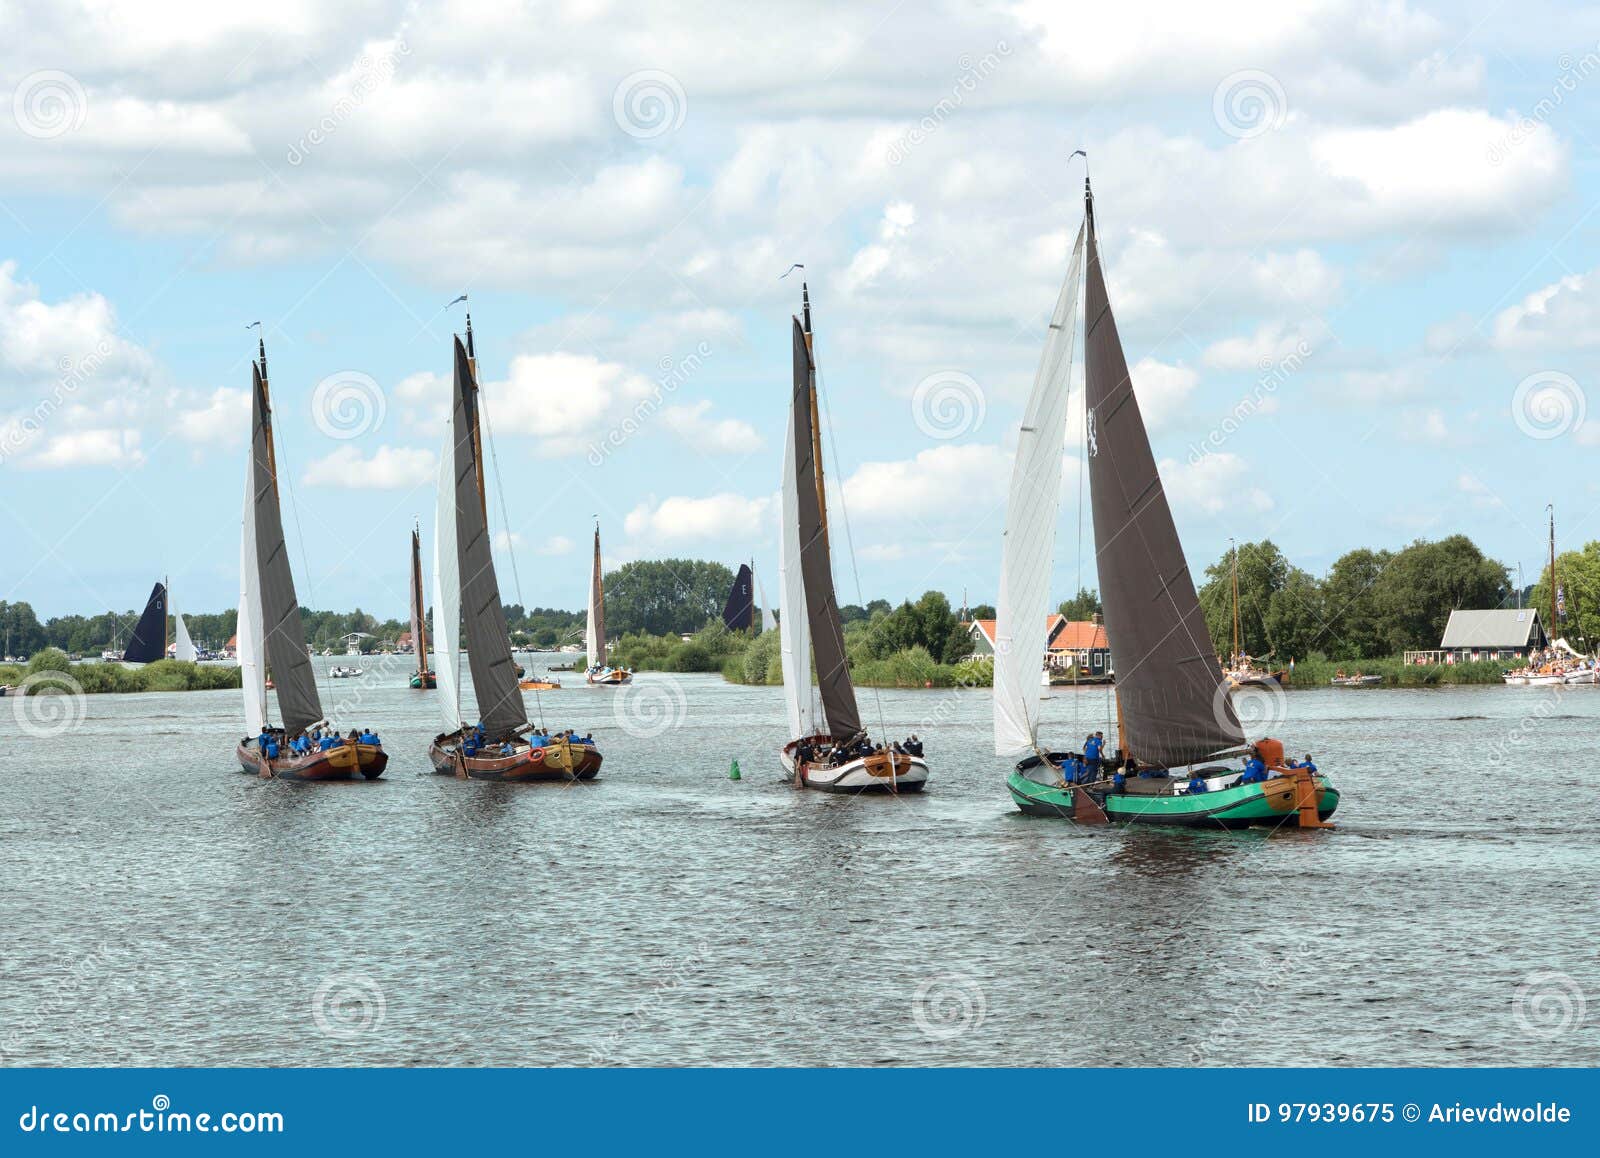 traditional frisian wooden sailing ships in a yearly competition